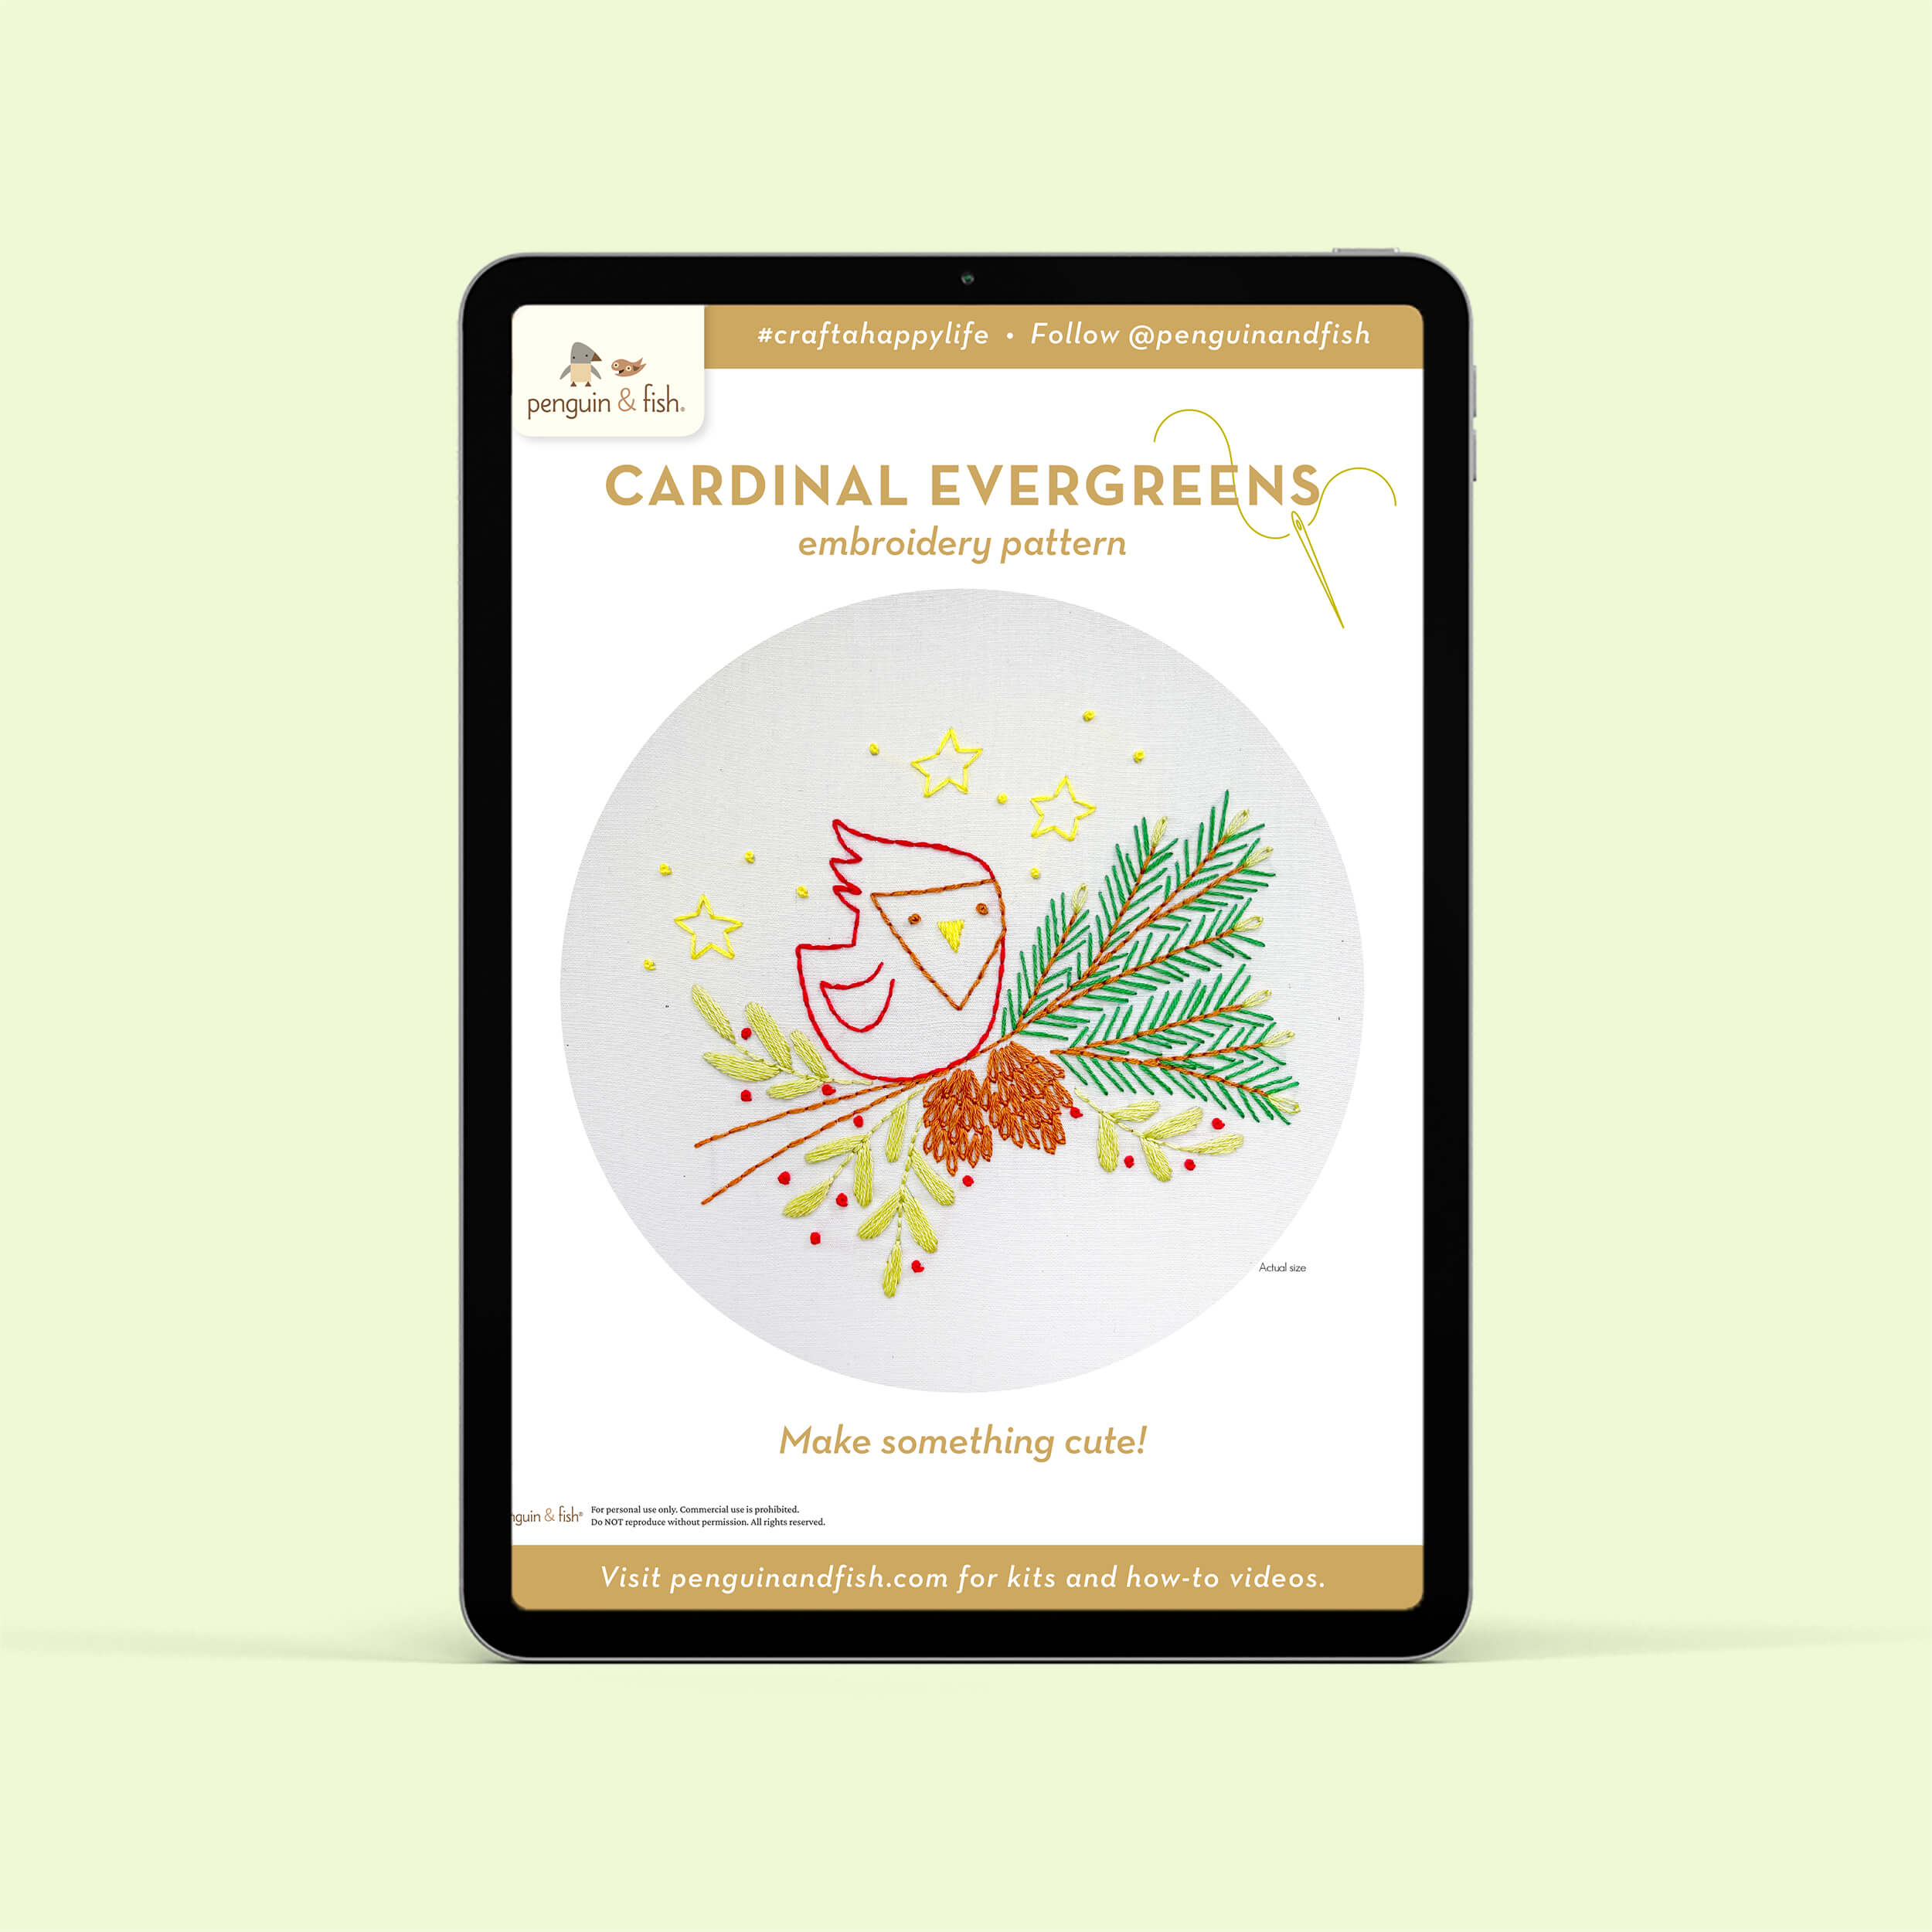 Cardinal Evergreens PDF embroidery pattern shown on a tablet